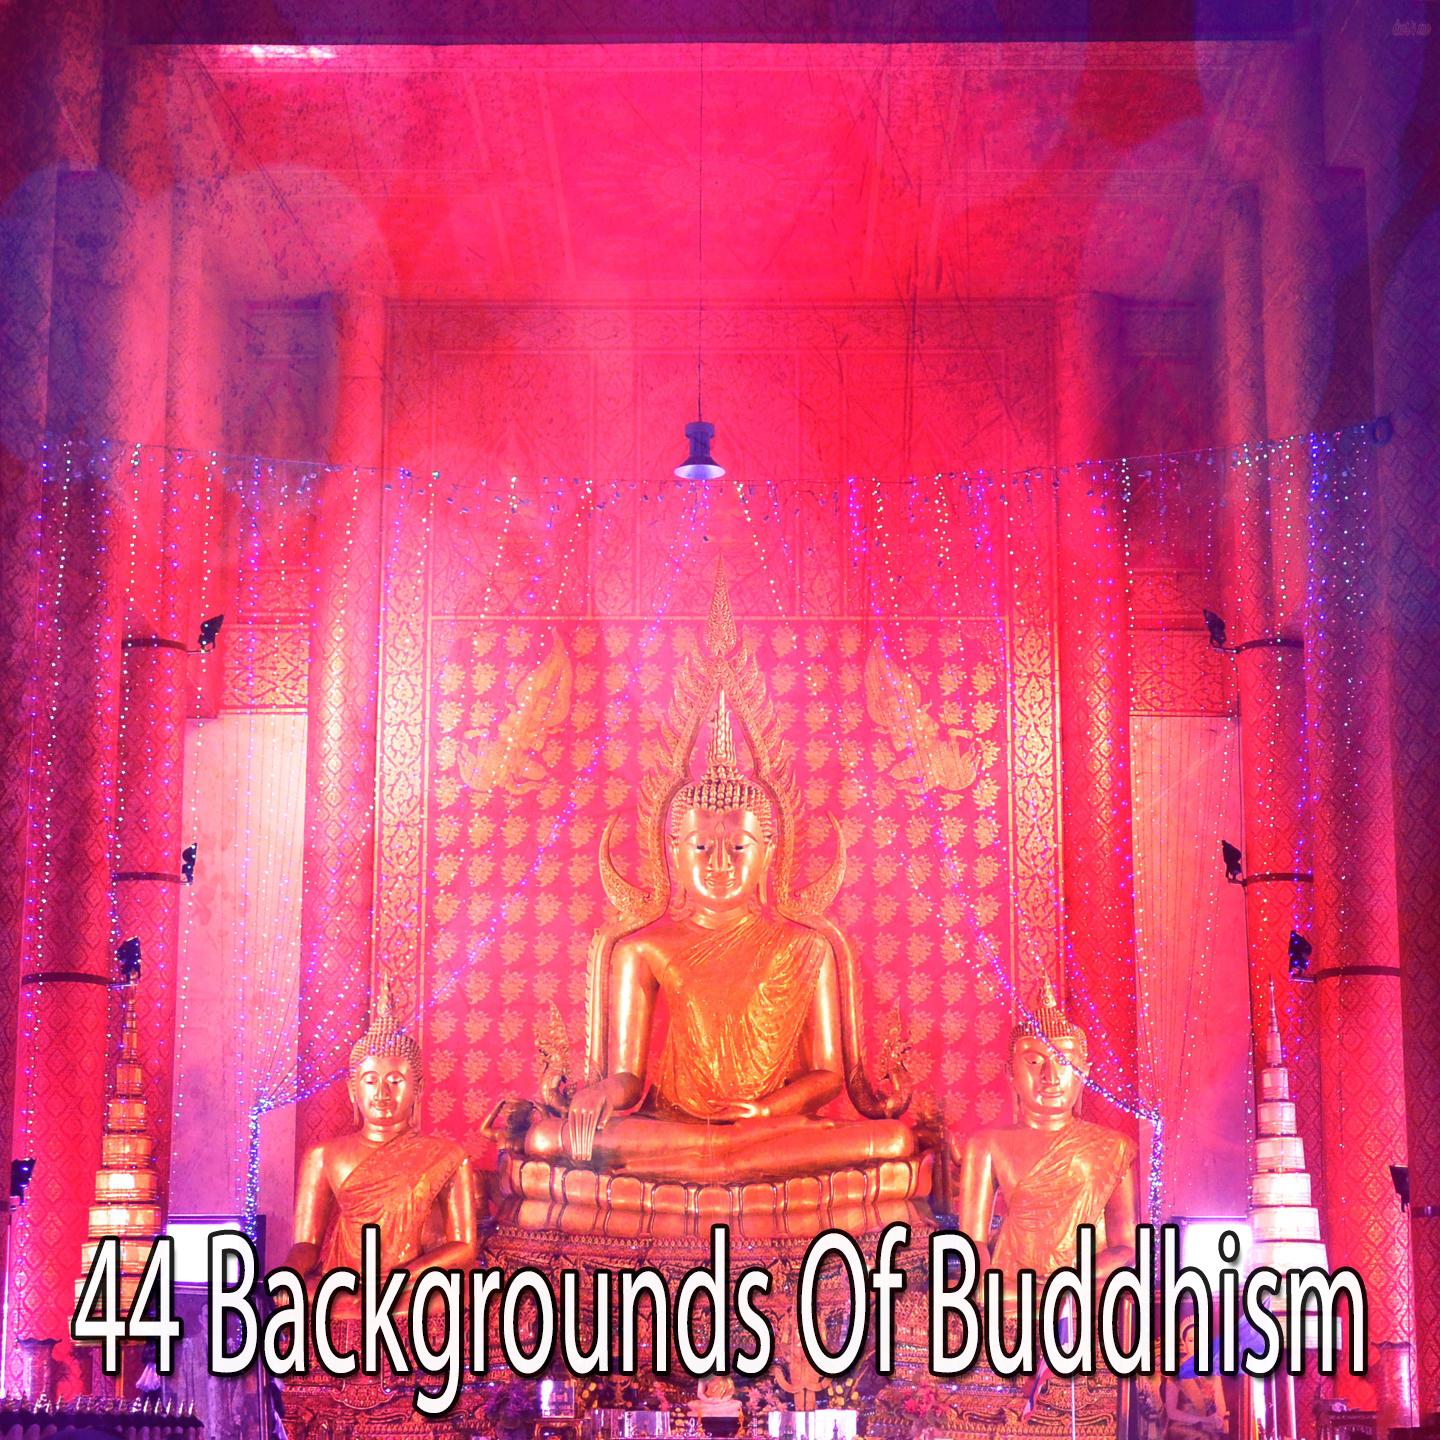 44 Backgrounds of Buddhism